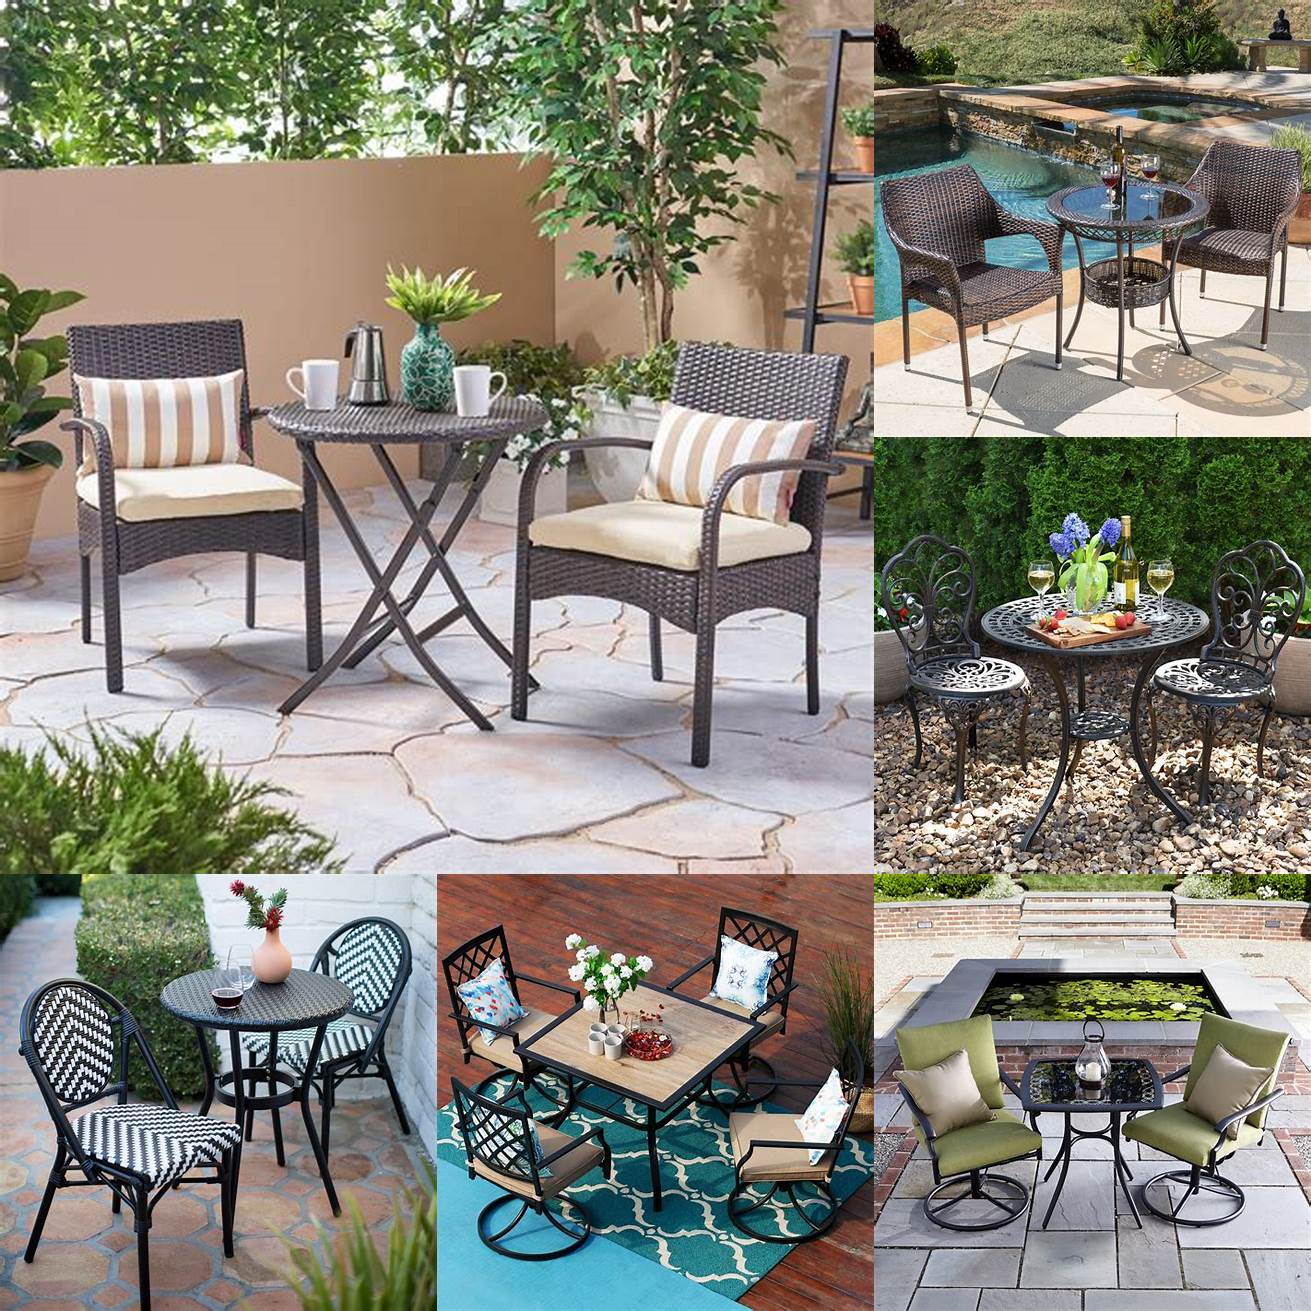 A bistro set in an outdoor space